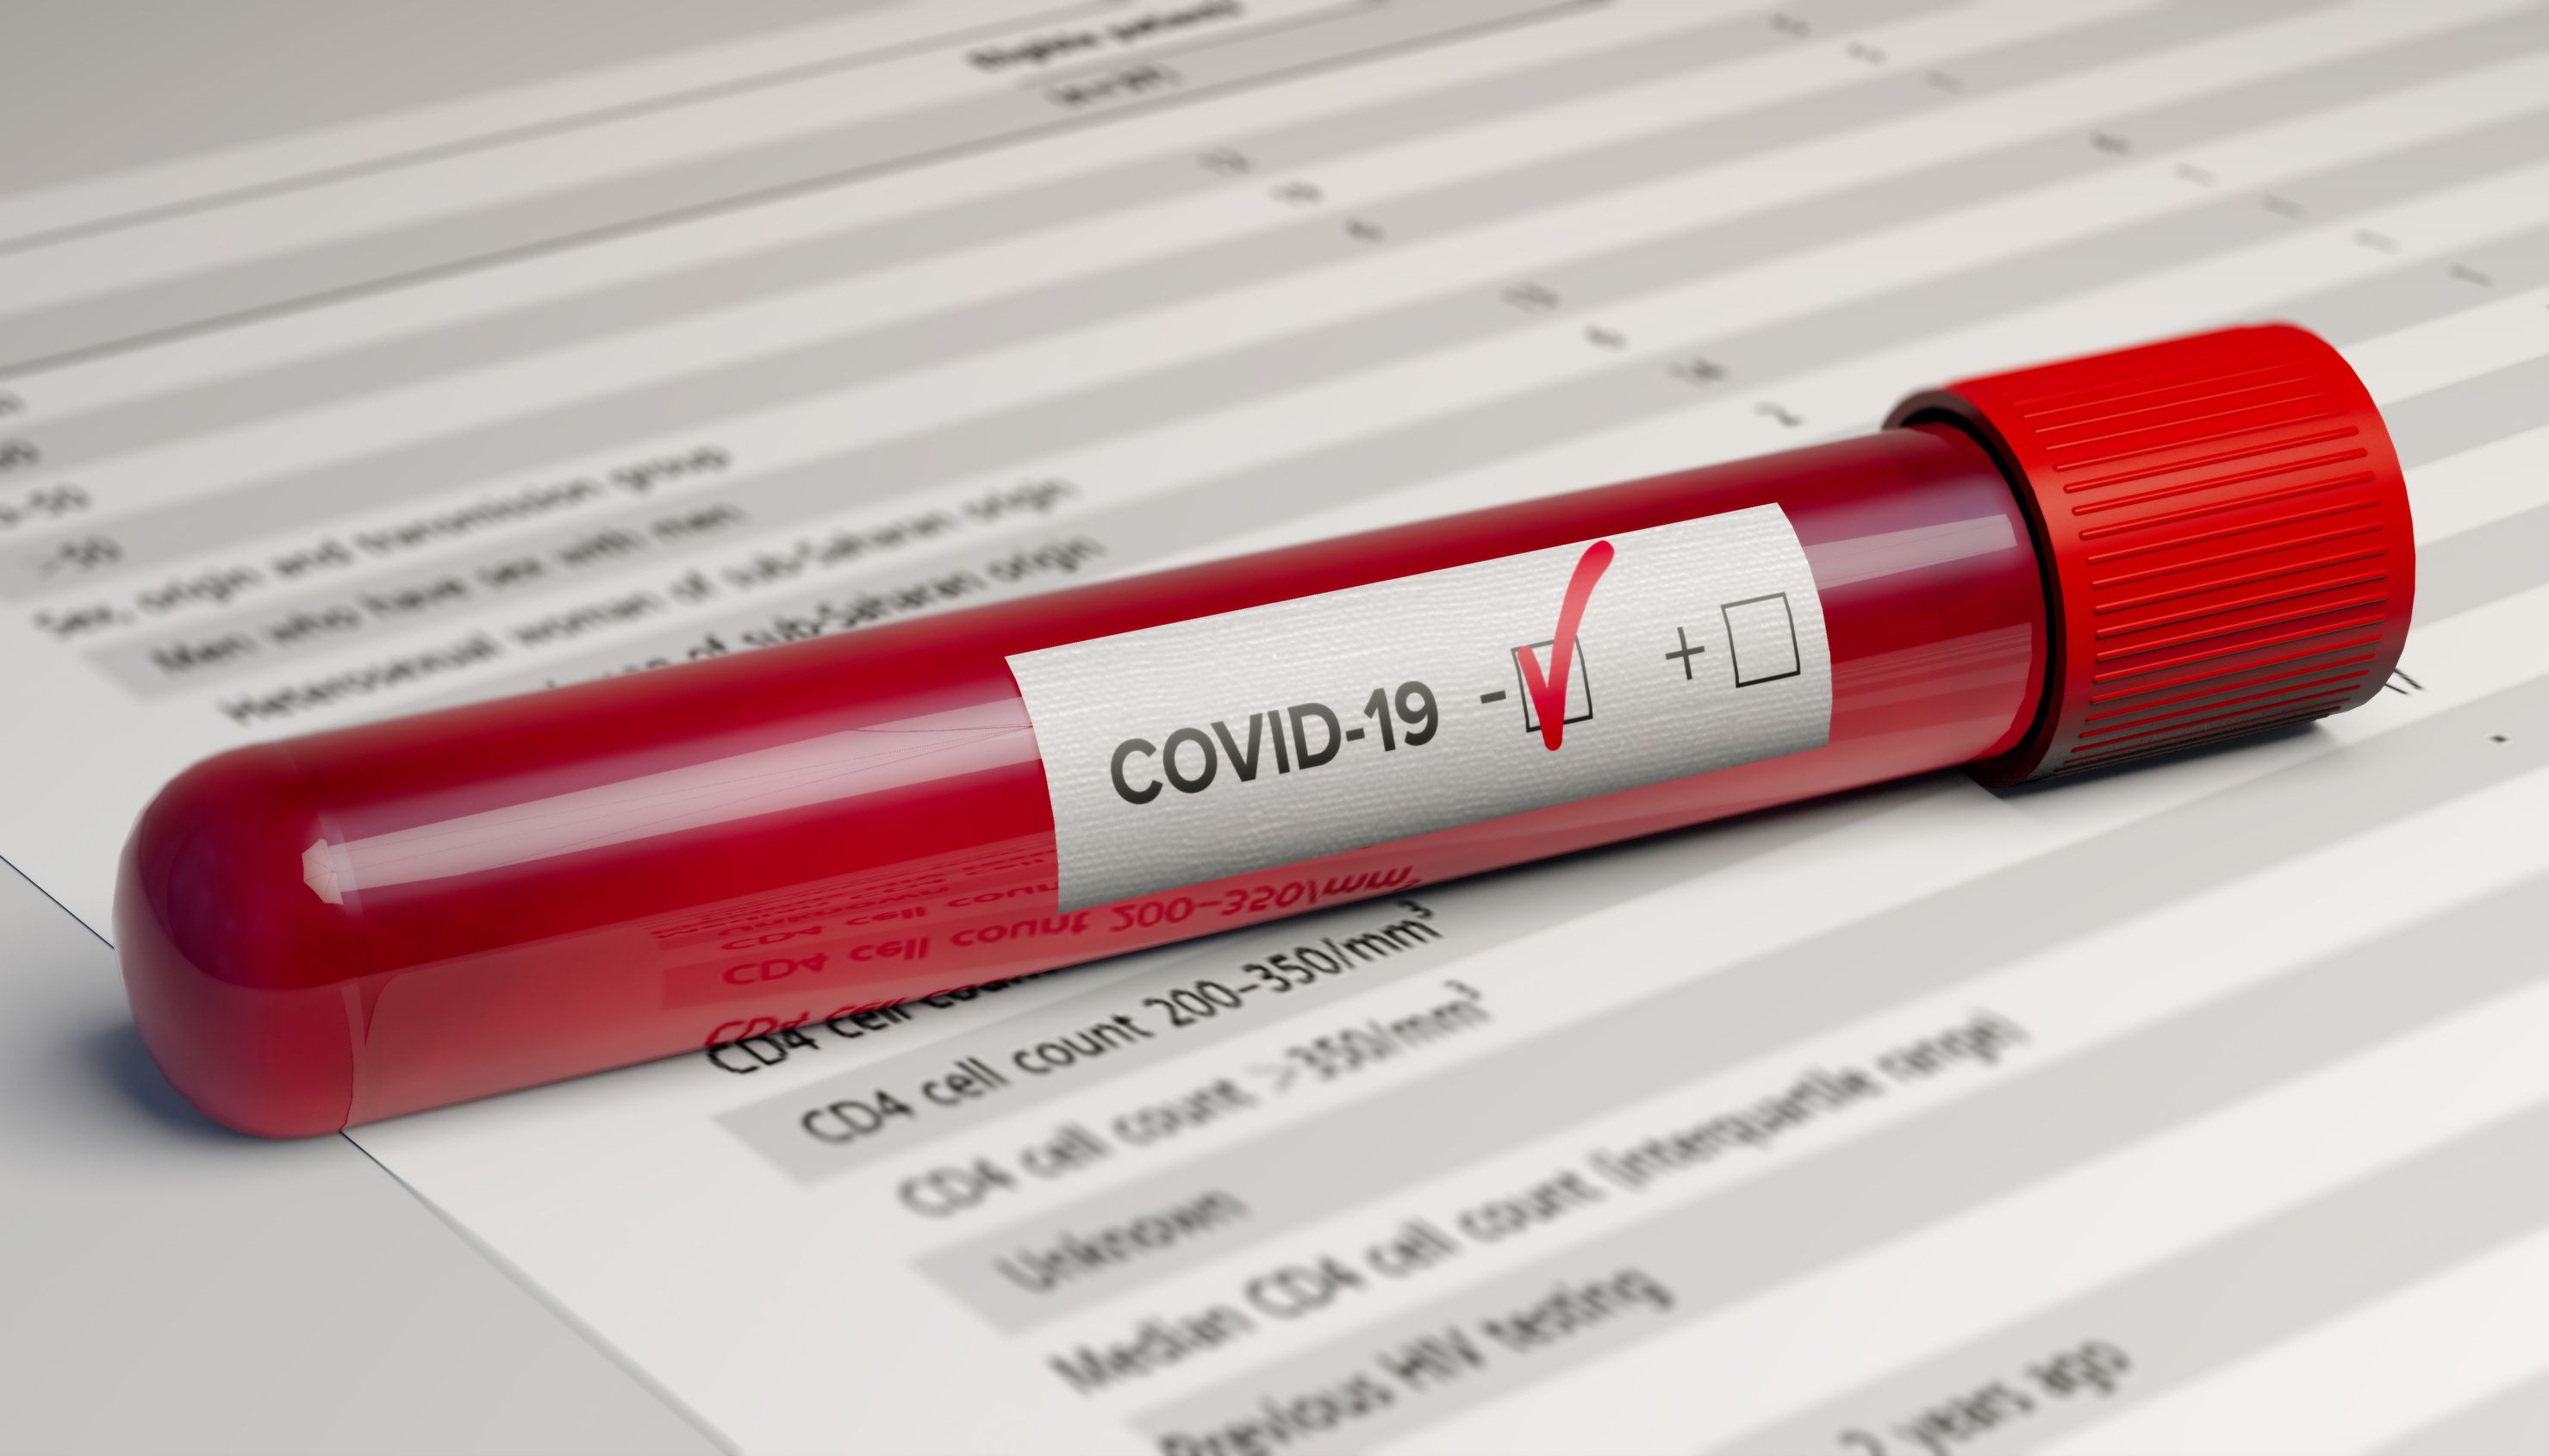 Rapid COVID-19 Testing available!